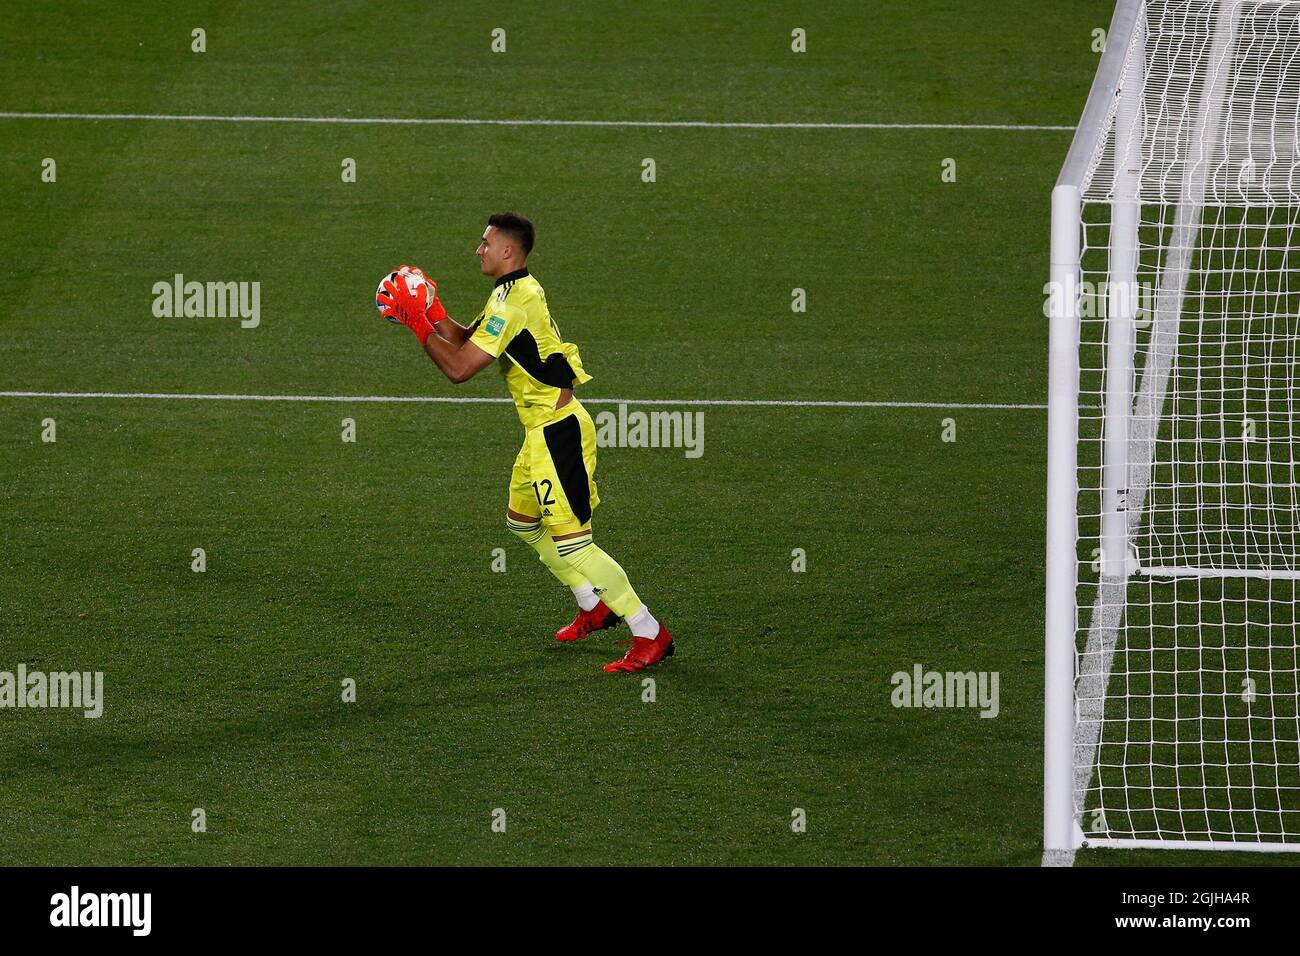 Goalkeeper Juan Musso (12) of Argentina handles the ball during a match between Argentina and Bolivia as part of South American Qualifiers for Qatar 2022 at Estadio Monumental Antonio Vespucio Liberti on September 9, 2021 in Buenos Aires, Argentina. Photo by Florencia Tan Jun/PxImages/ABACAPRESS.COM Stock Photo